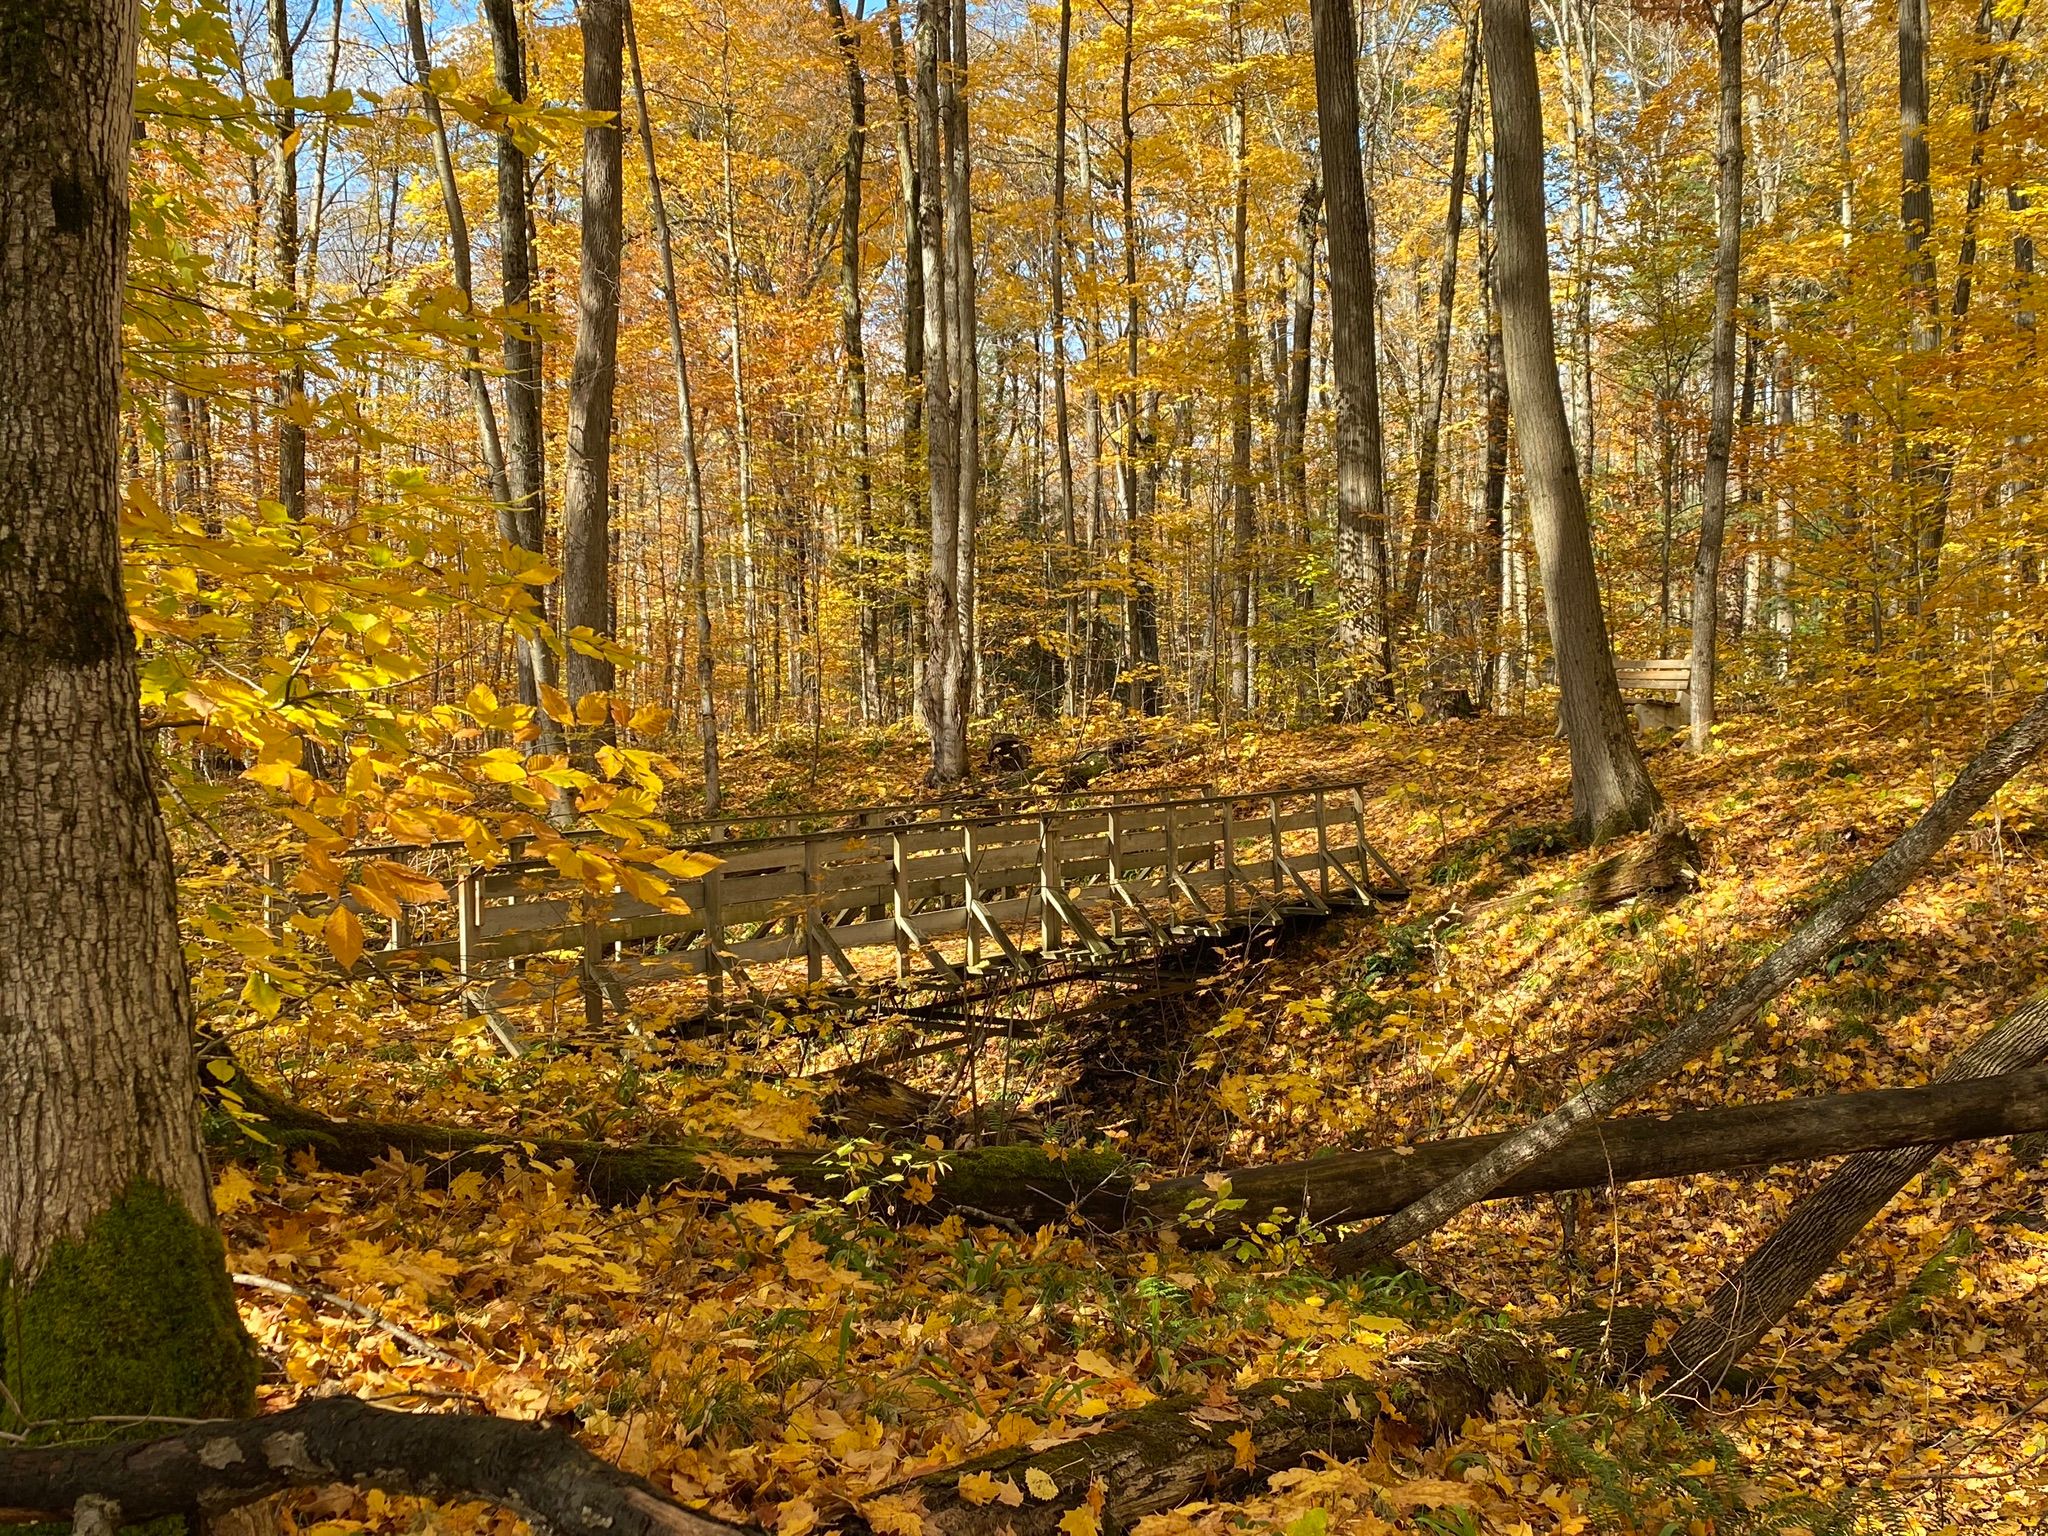 Wooden bridge crossing a ravine, in the woods during fall, leaves coloured orange